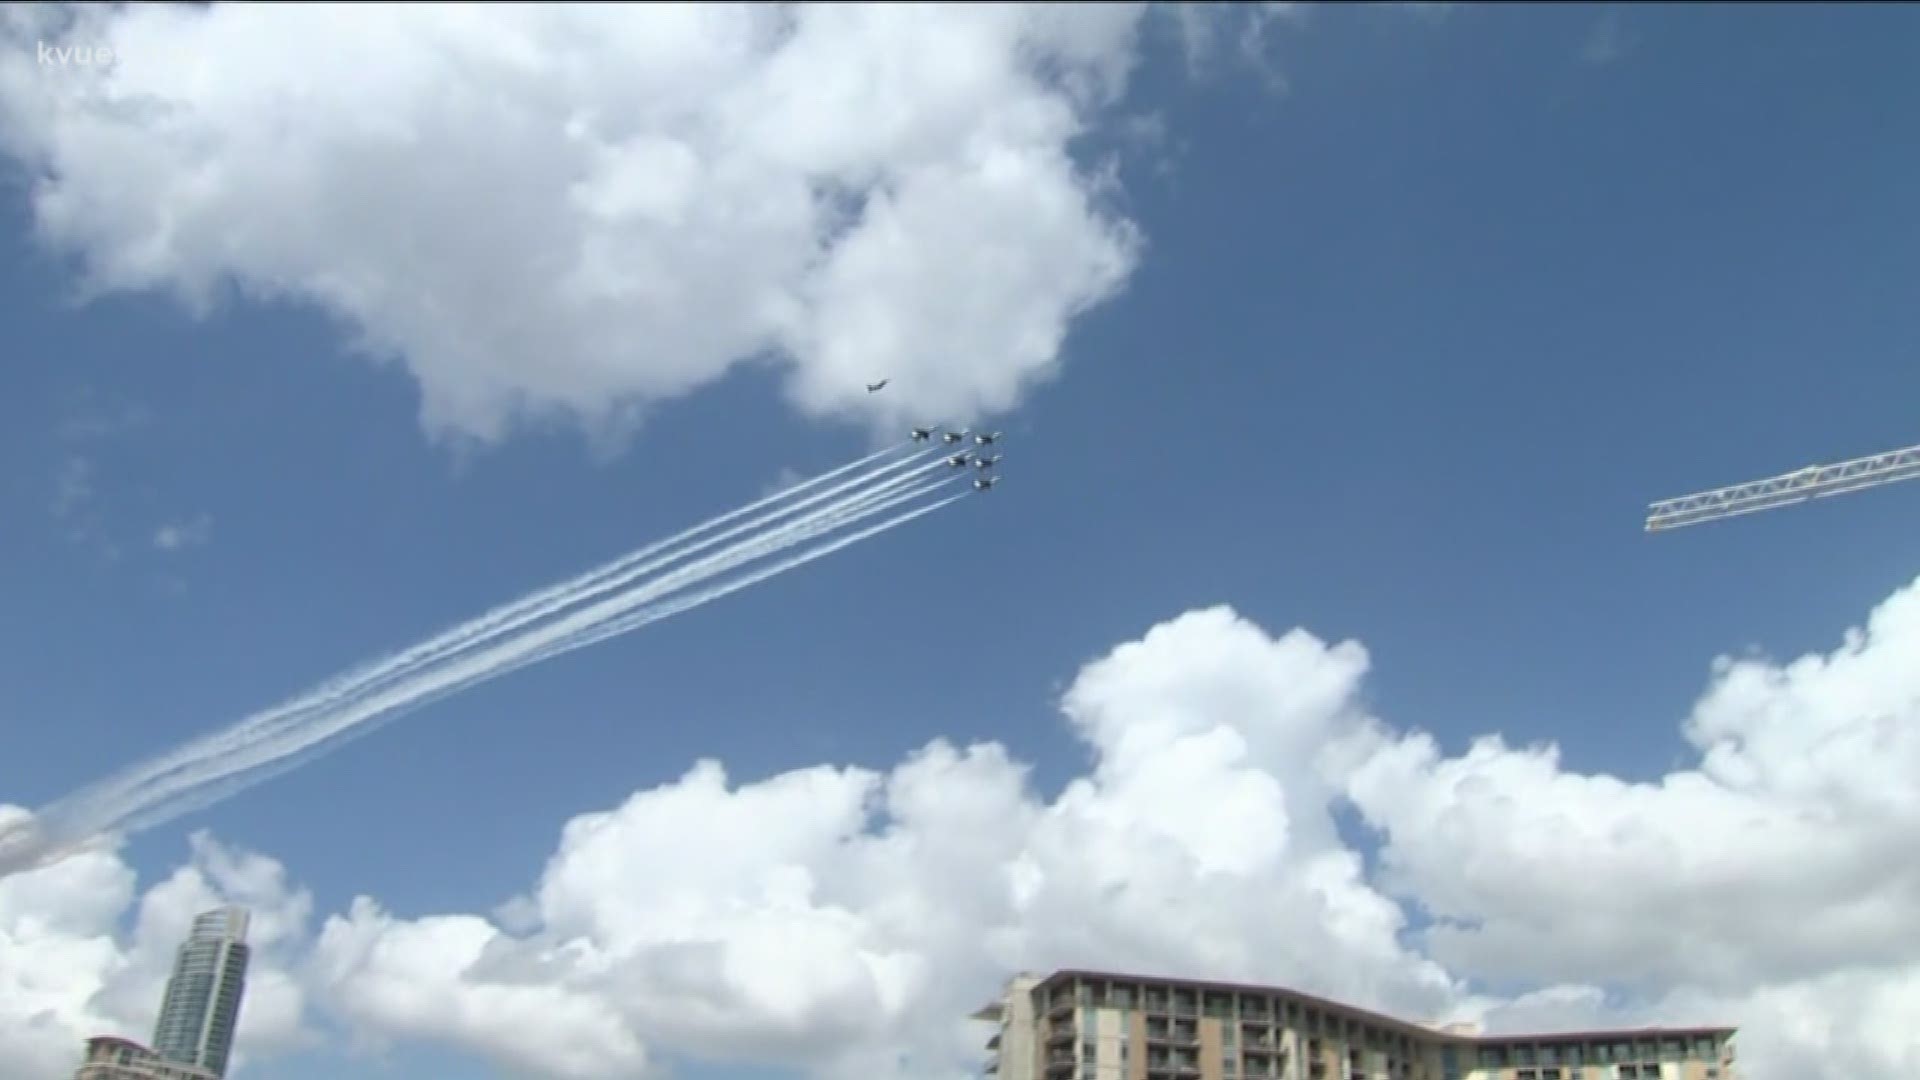 The U.S. Air Force Thunderbirds spent about 25 minutes doing a flyover all across the Austin area.